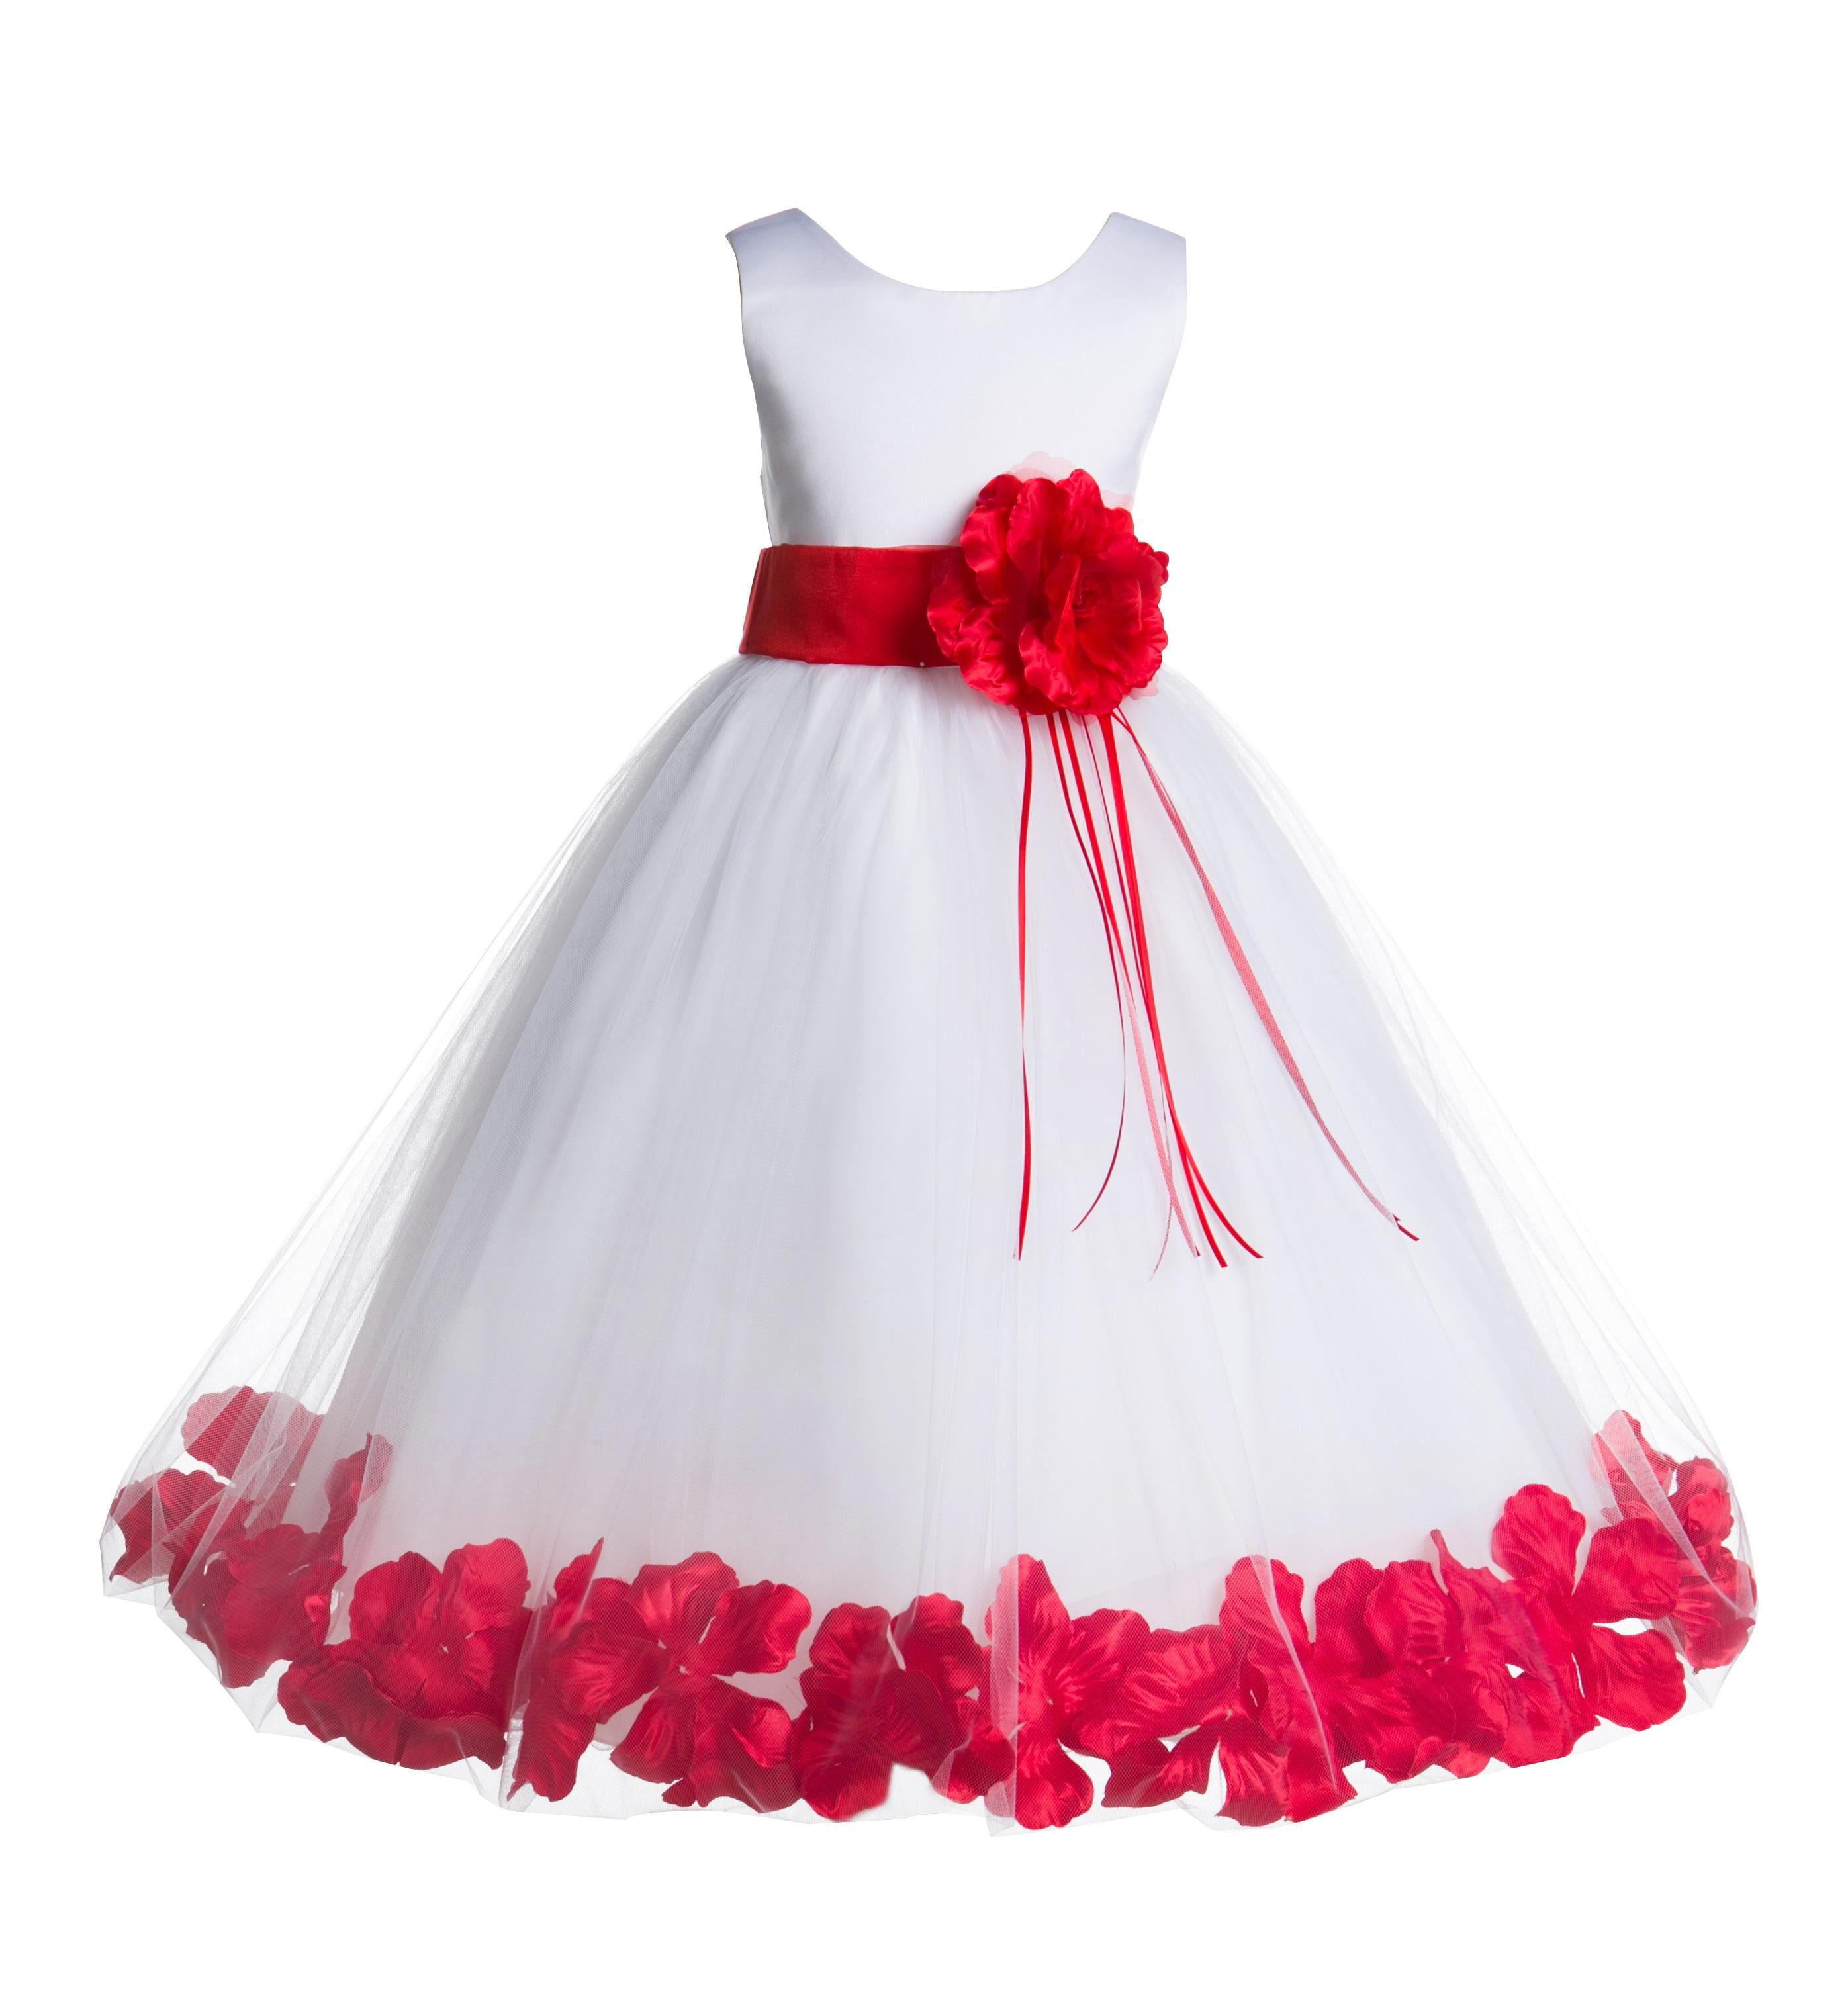 For Kids Party Dress Holiday Formal Pageant Wedding Bridesmaid Flower Girl Dress 